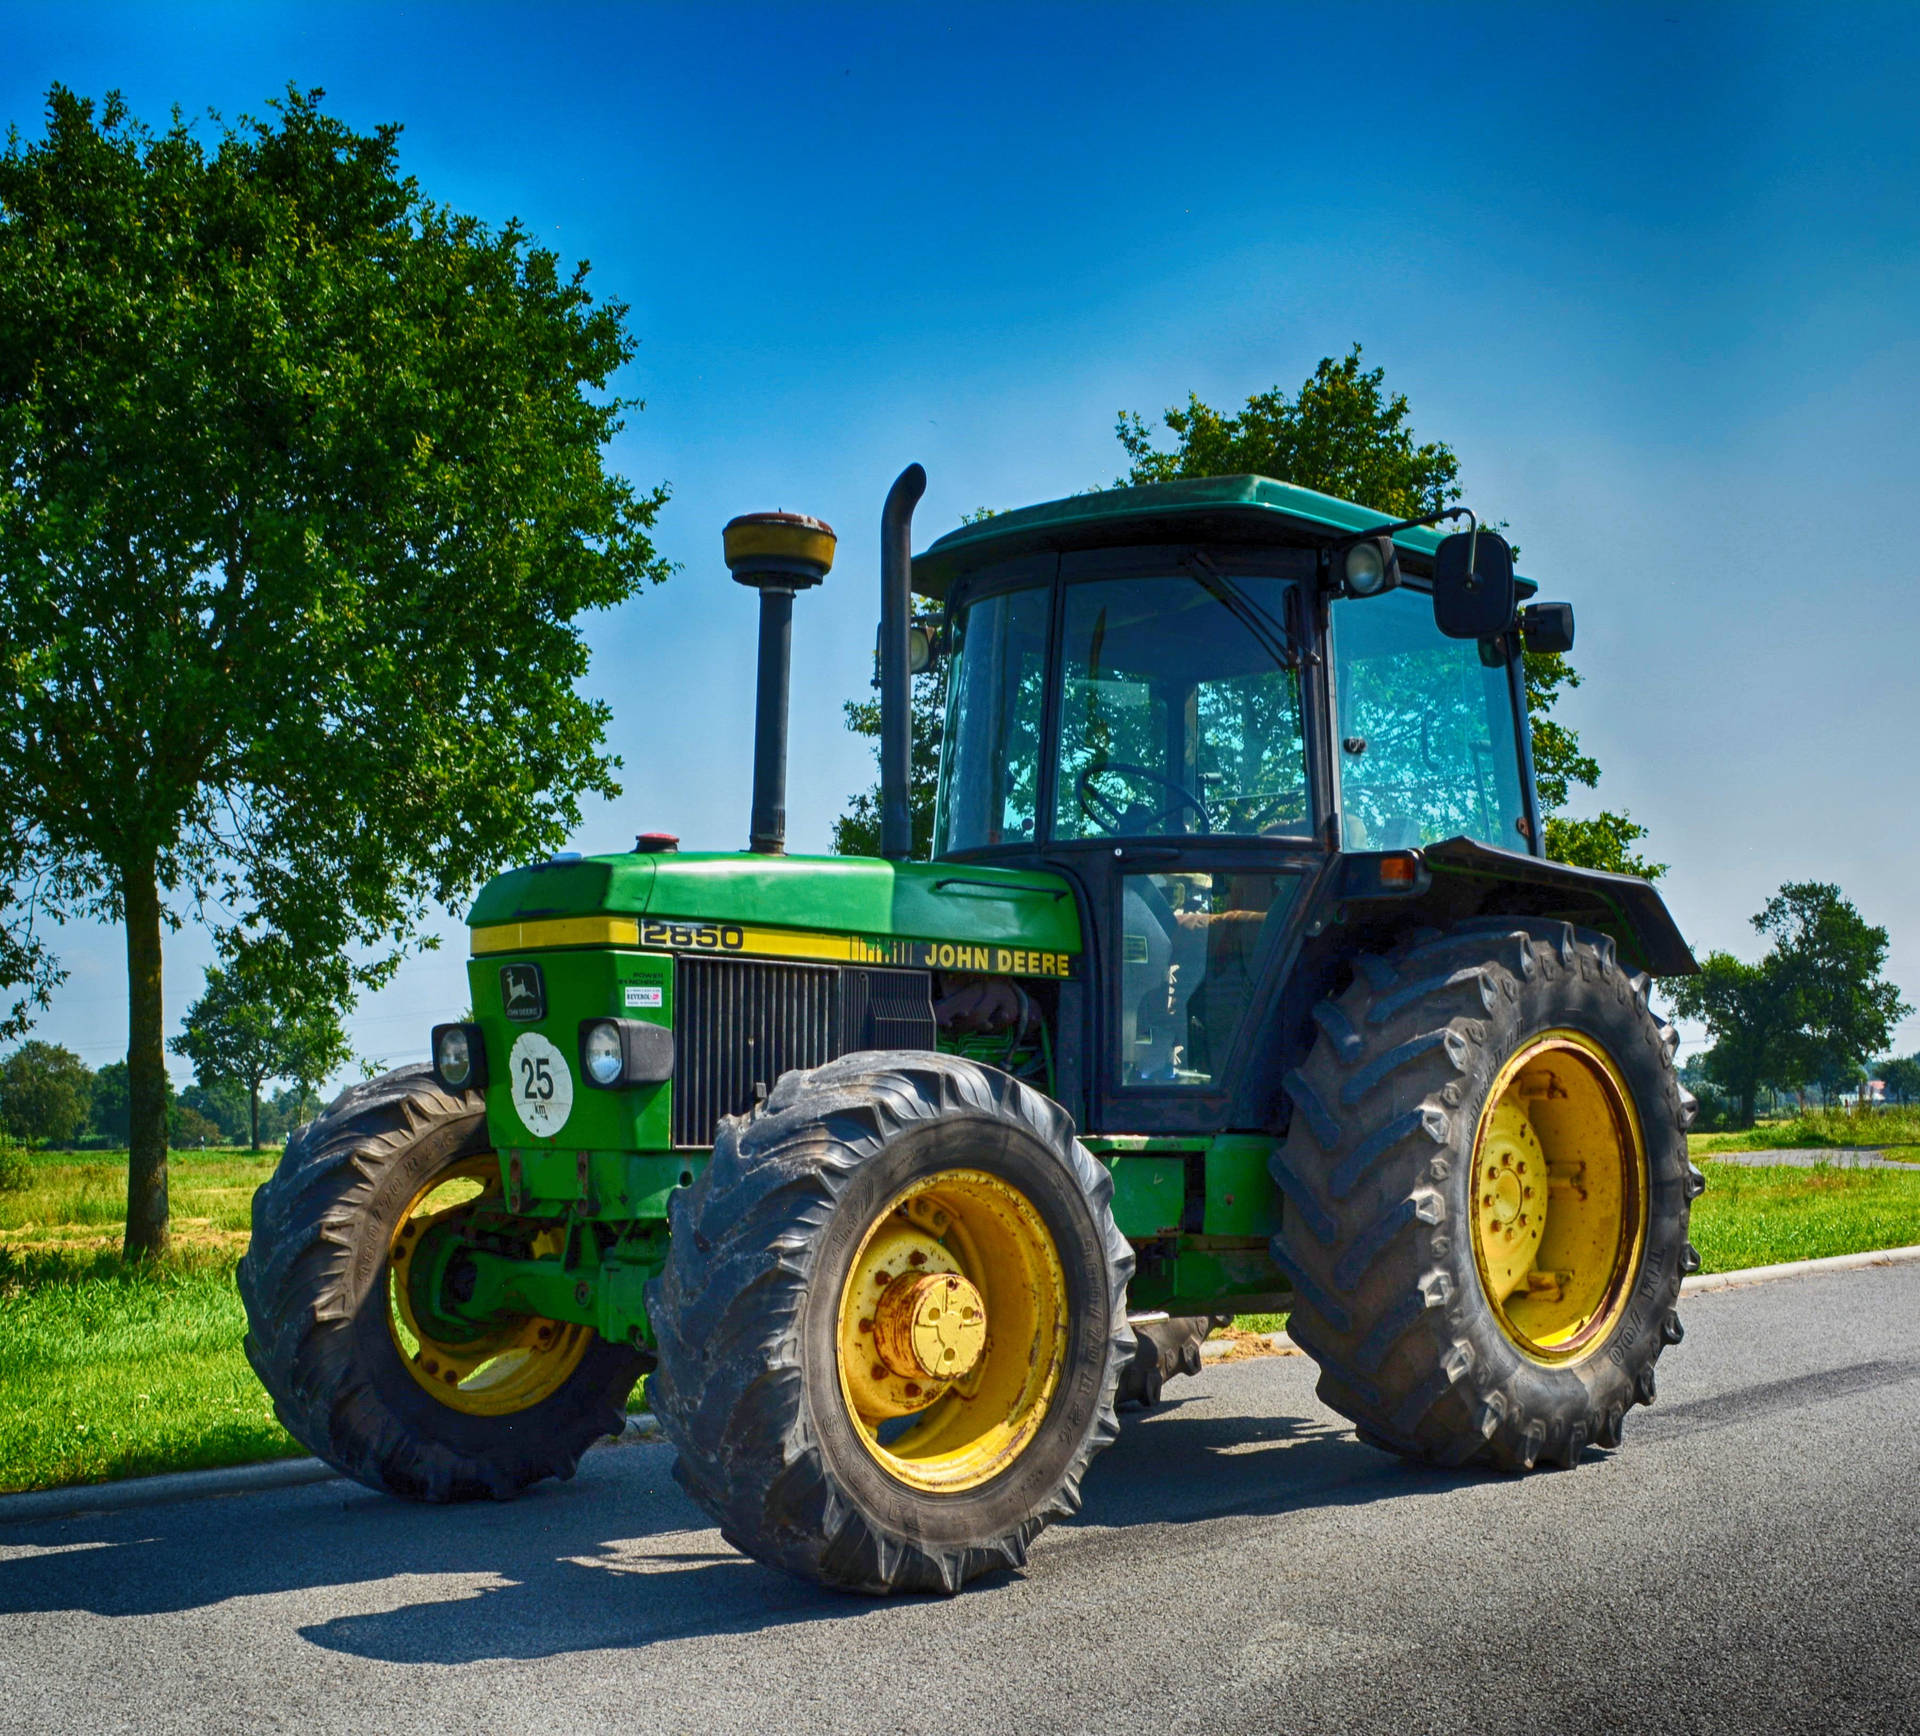 Small John Deere Tractor On Road Background